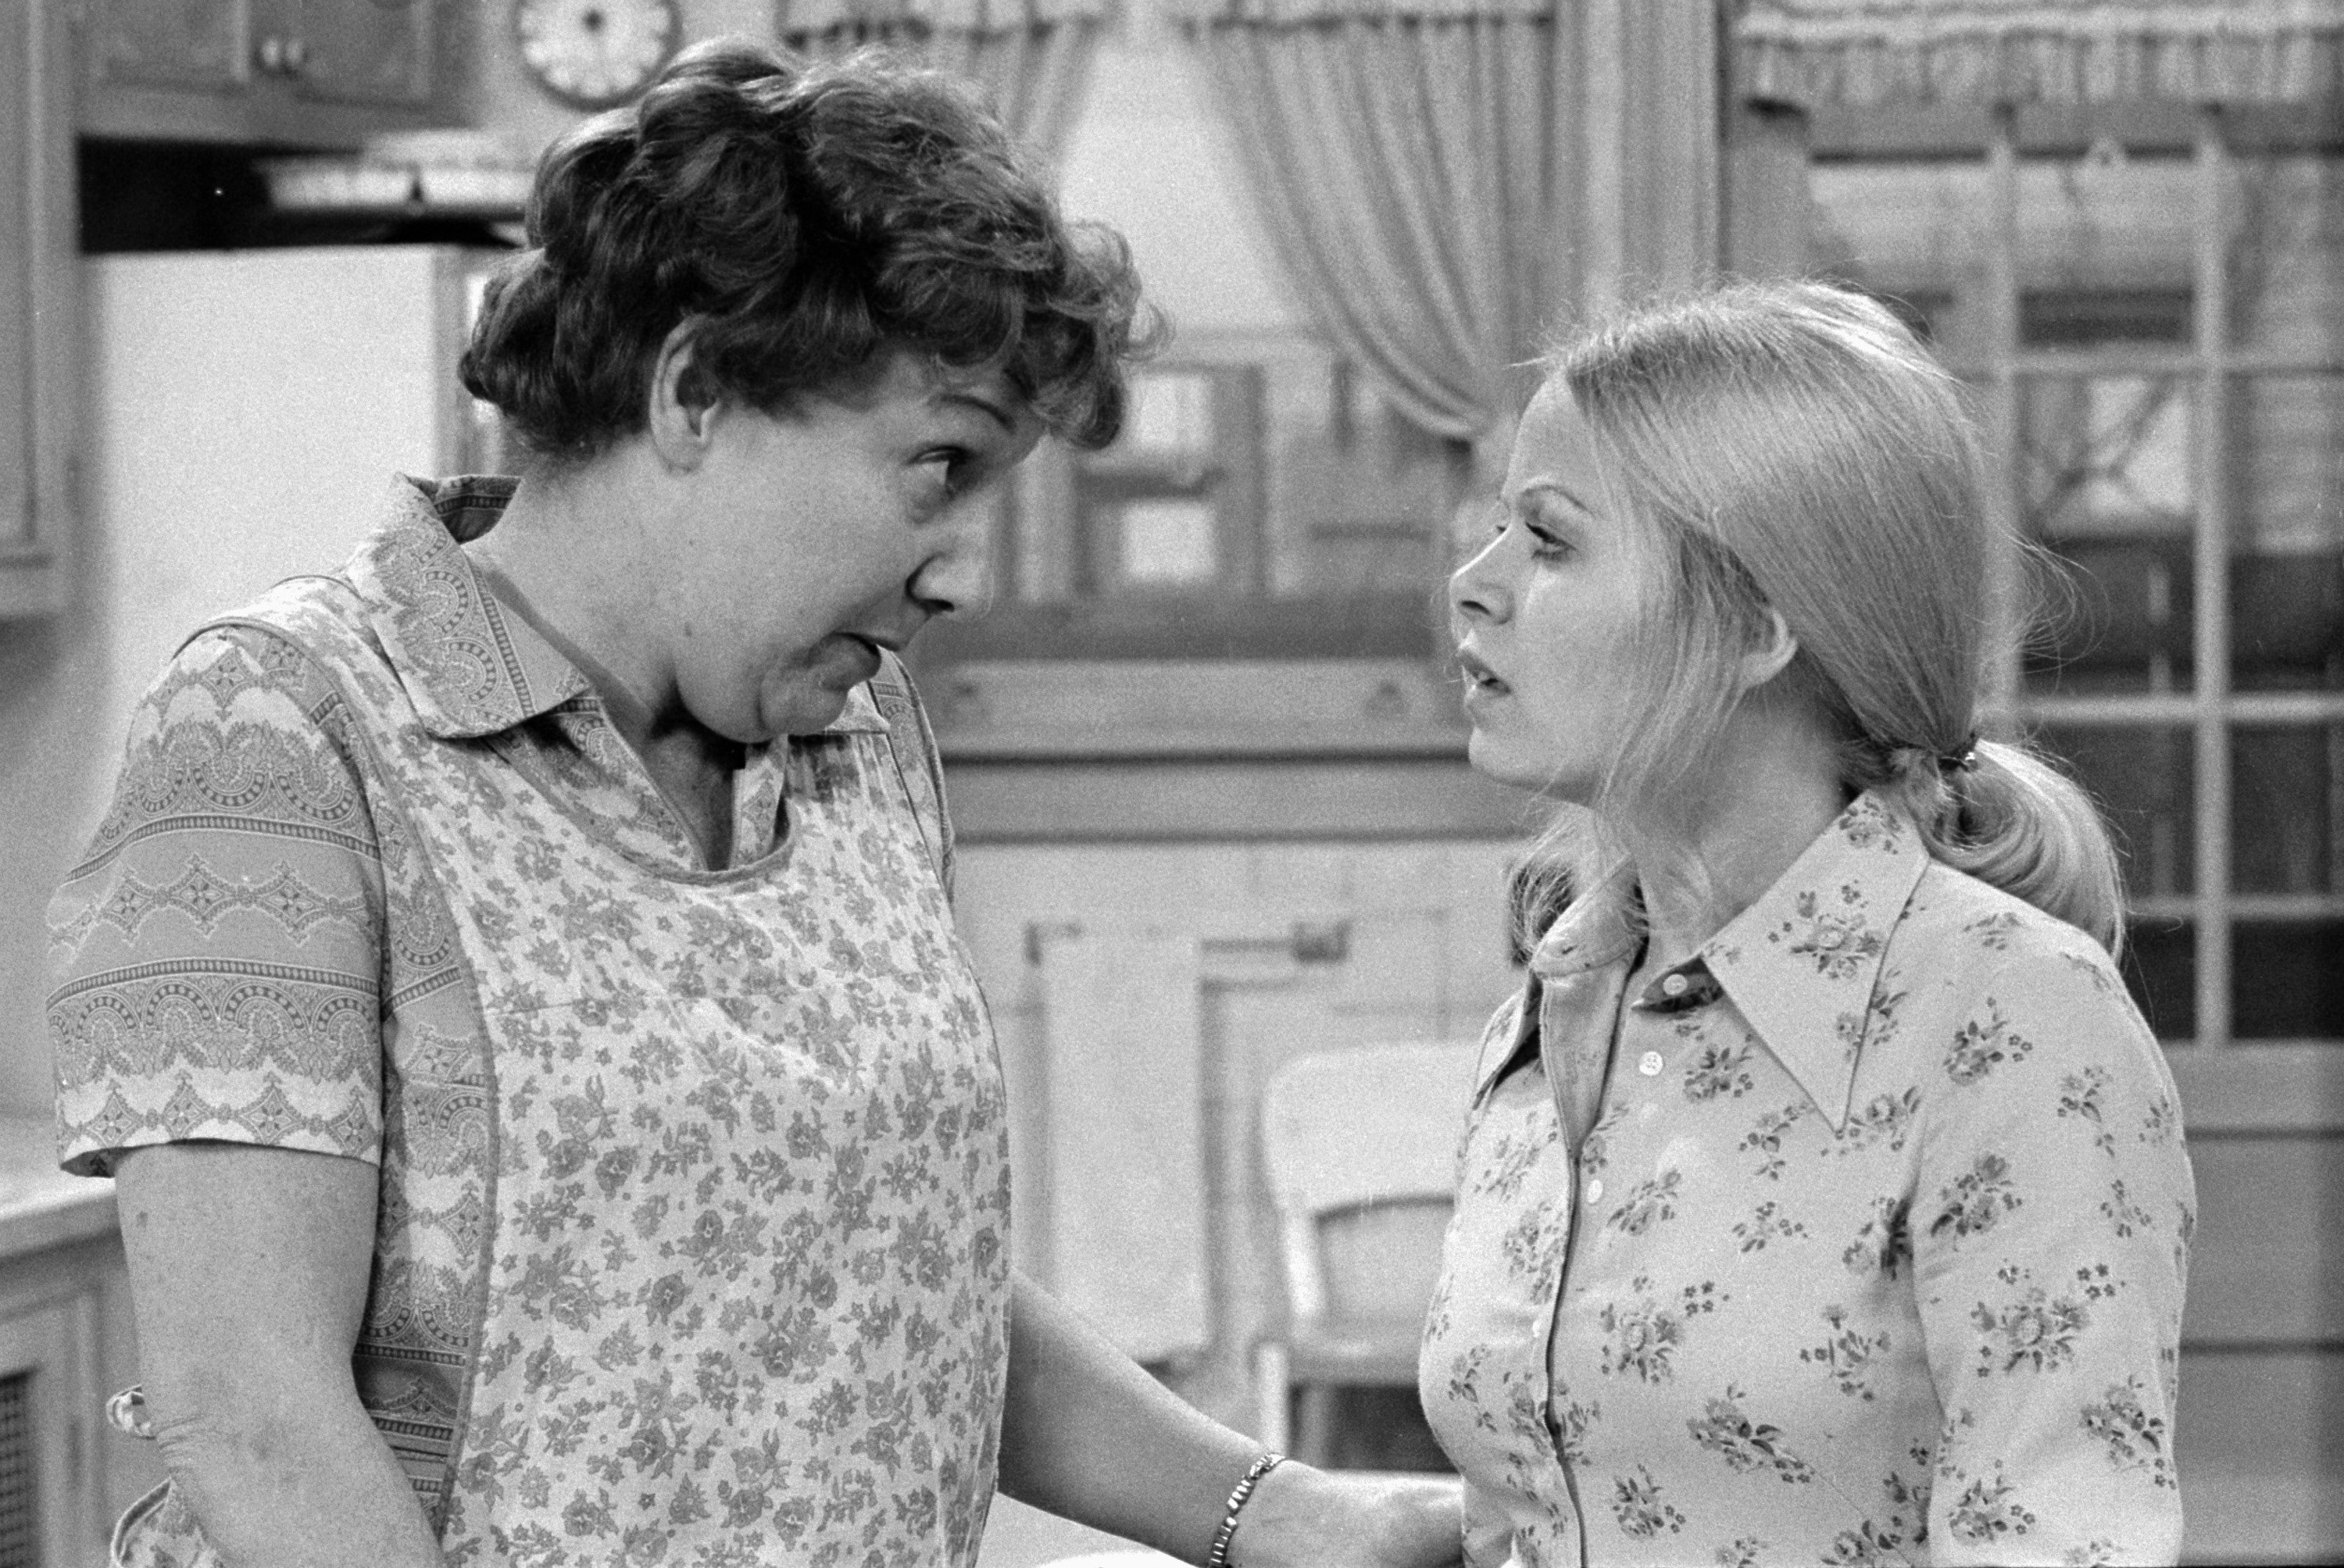 Jean Stapleton (as Edith Bunker) and Sally Struthers (as Gloria Bunker) in "All In The Family" | Source: Getty Images